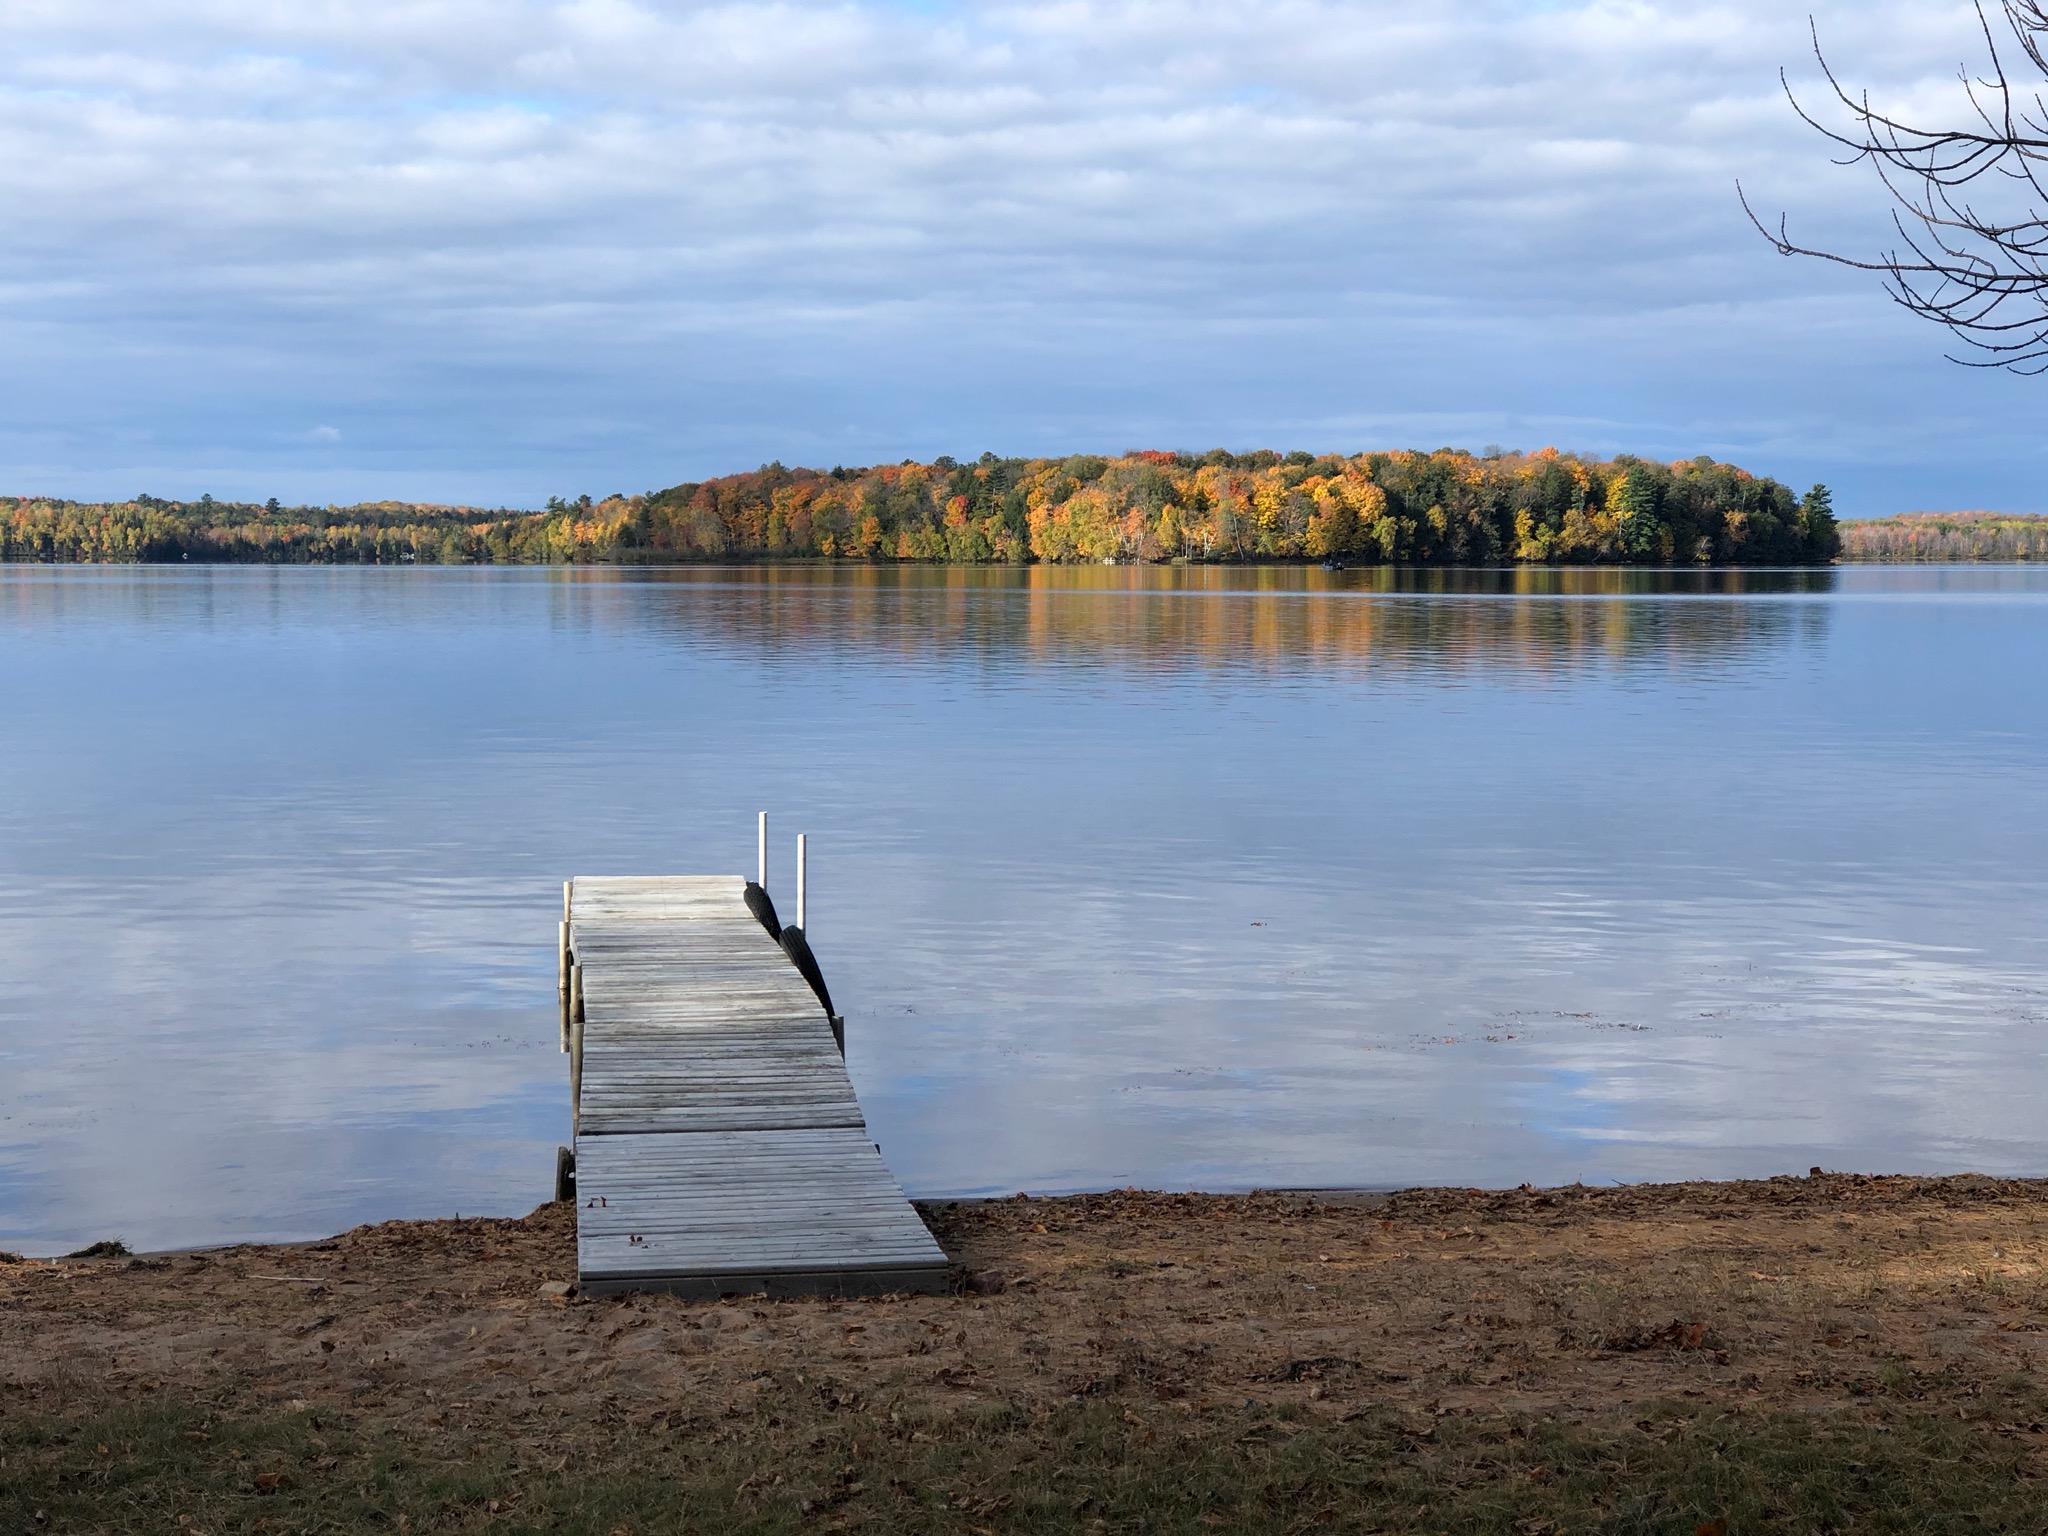 The view of Lake Namakagon and the dock from Ron Weber's cabin near Cable, Wisconsin. (Photo by Ron Weber)